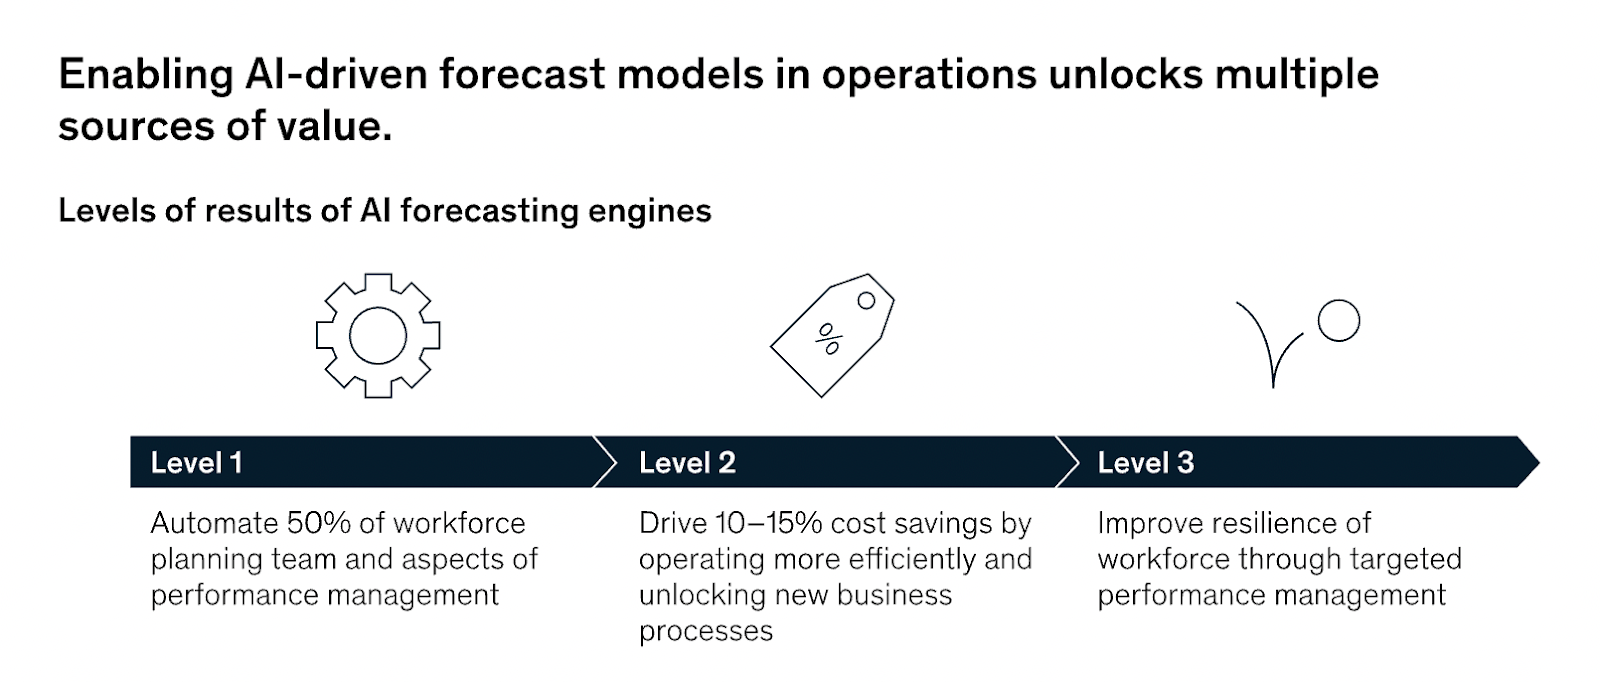 AI-driven forecast models improves the accuracy of forecasting, automate workforce, and save cost. 